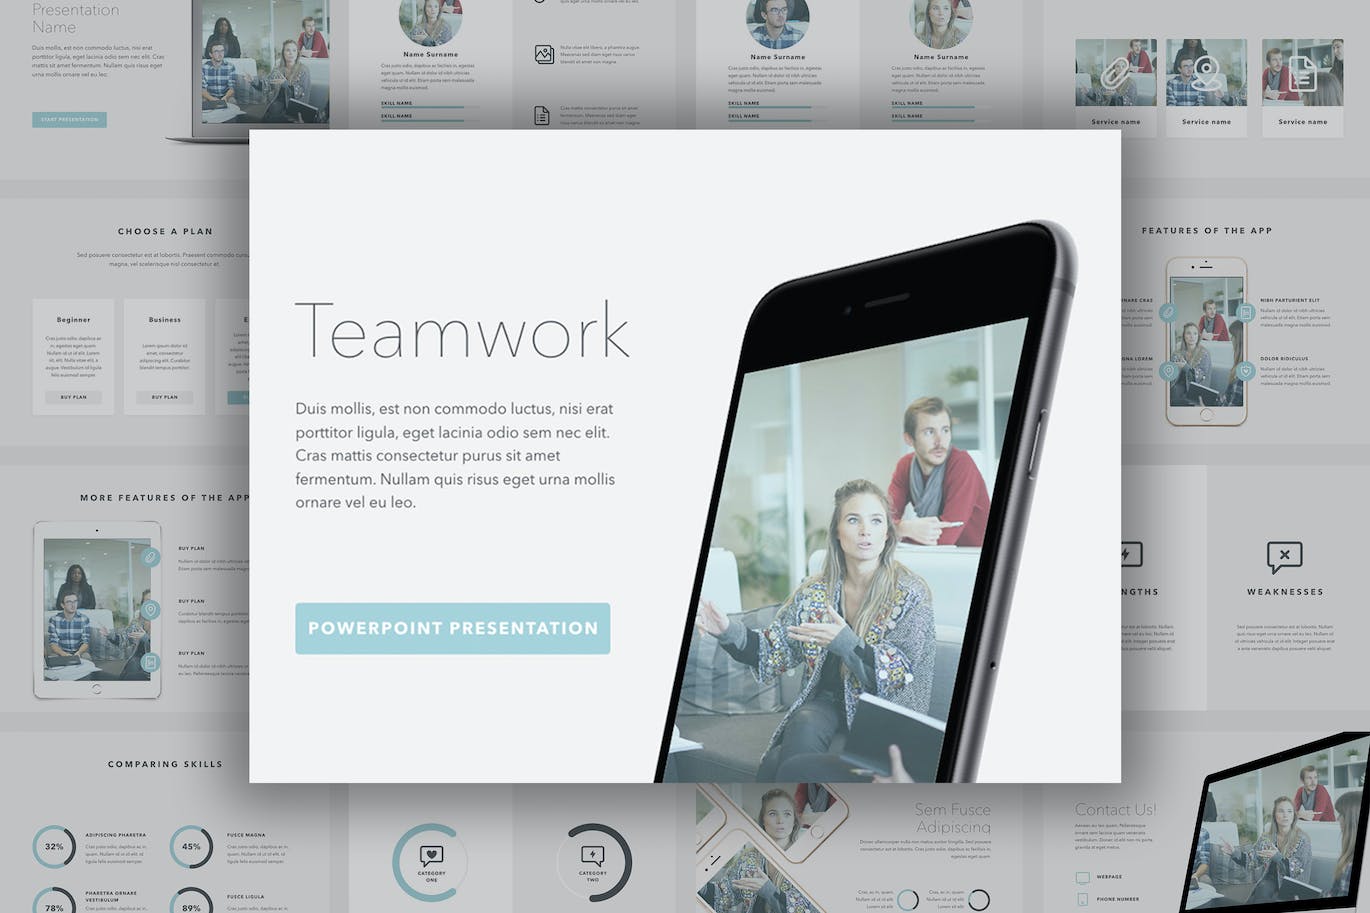 A collection of images of adorable slide presentation template on the theme of teamwork.